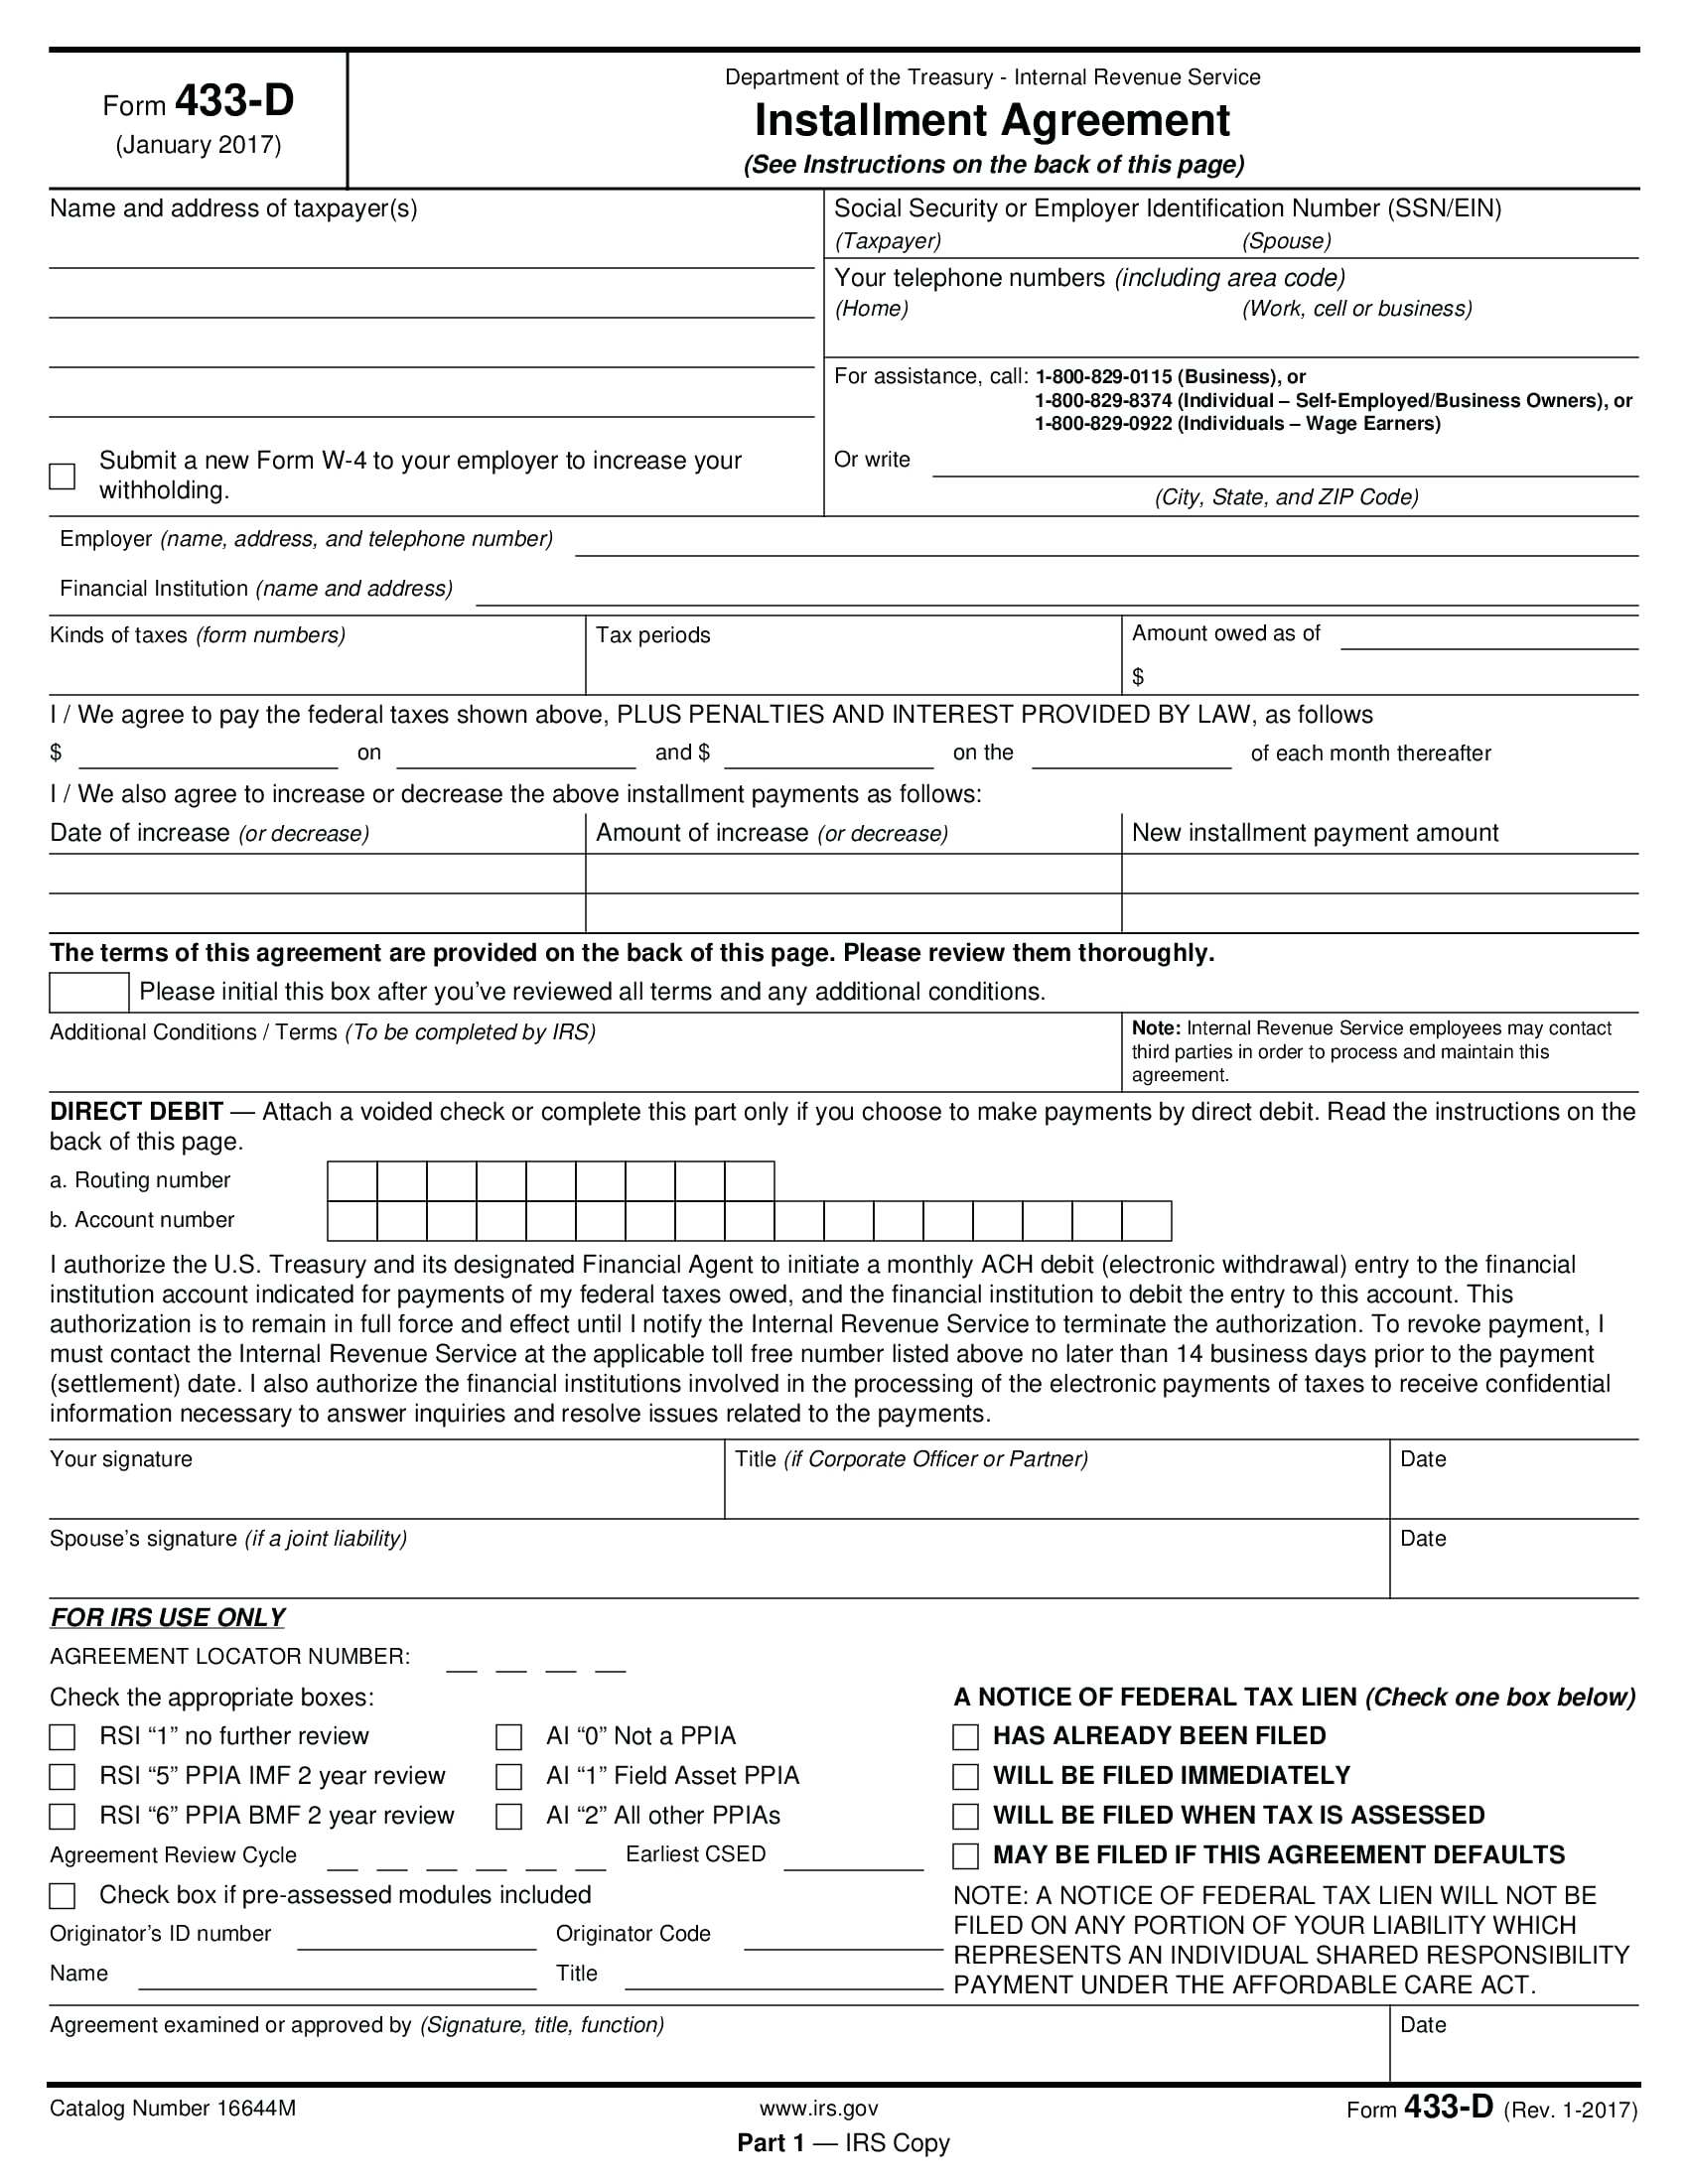 Irs Installment Agreement Online Irs Payment Plan Form Installment Online Agreement New 9465